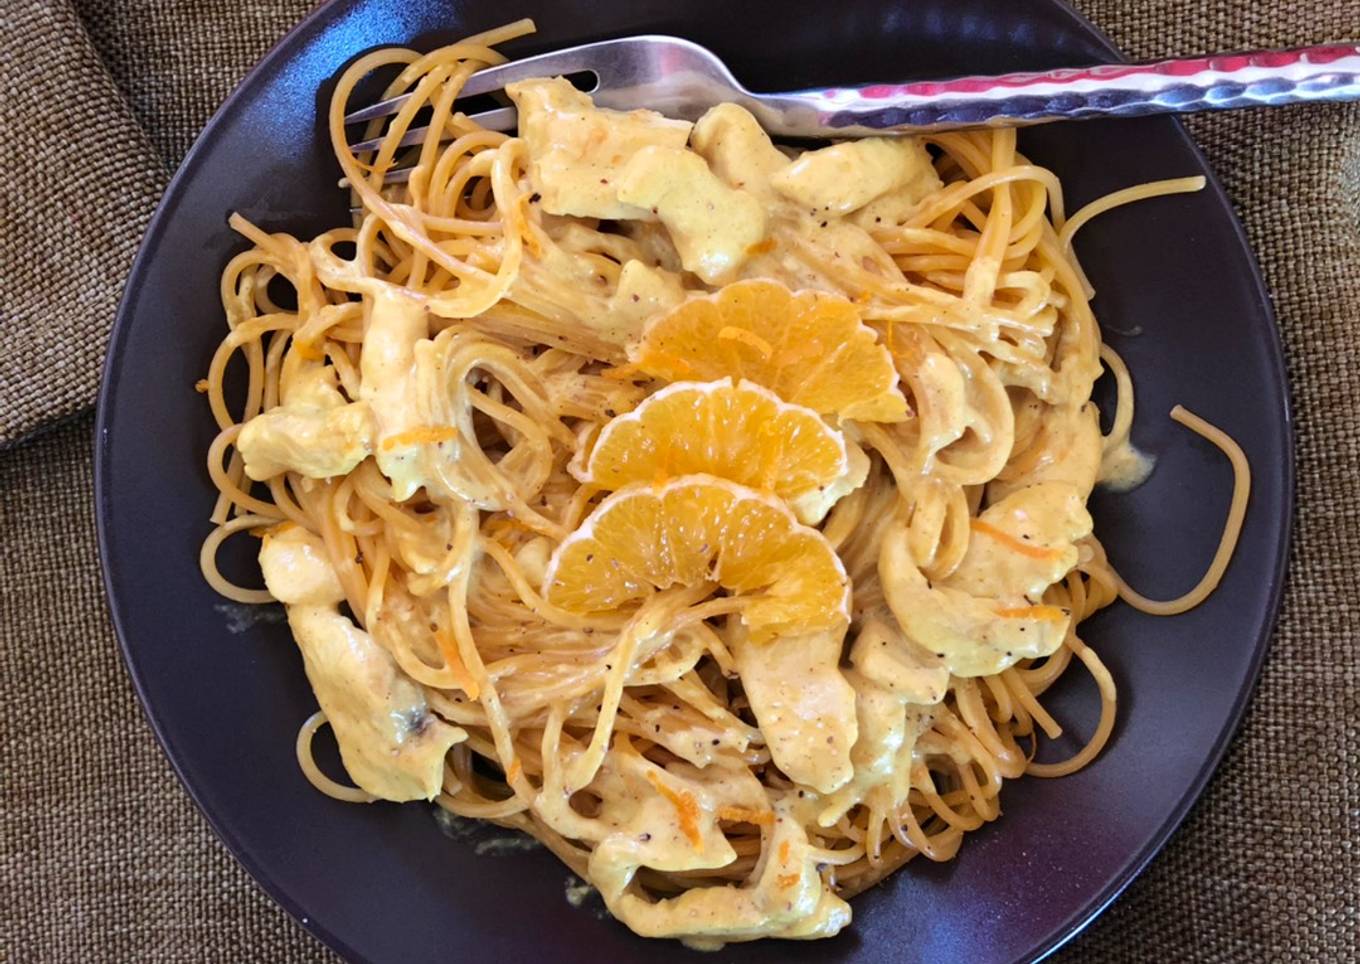 Spaghetti with chicken, curry and orange